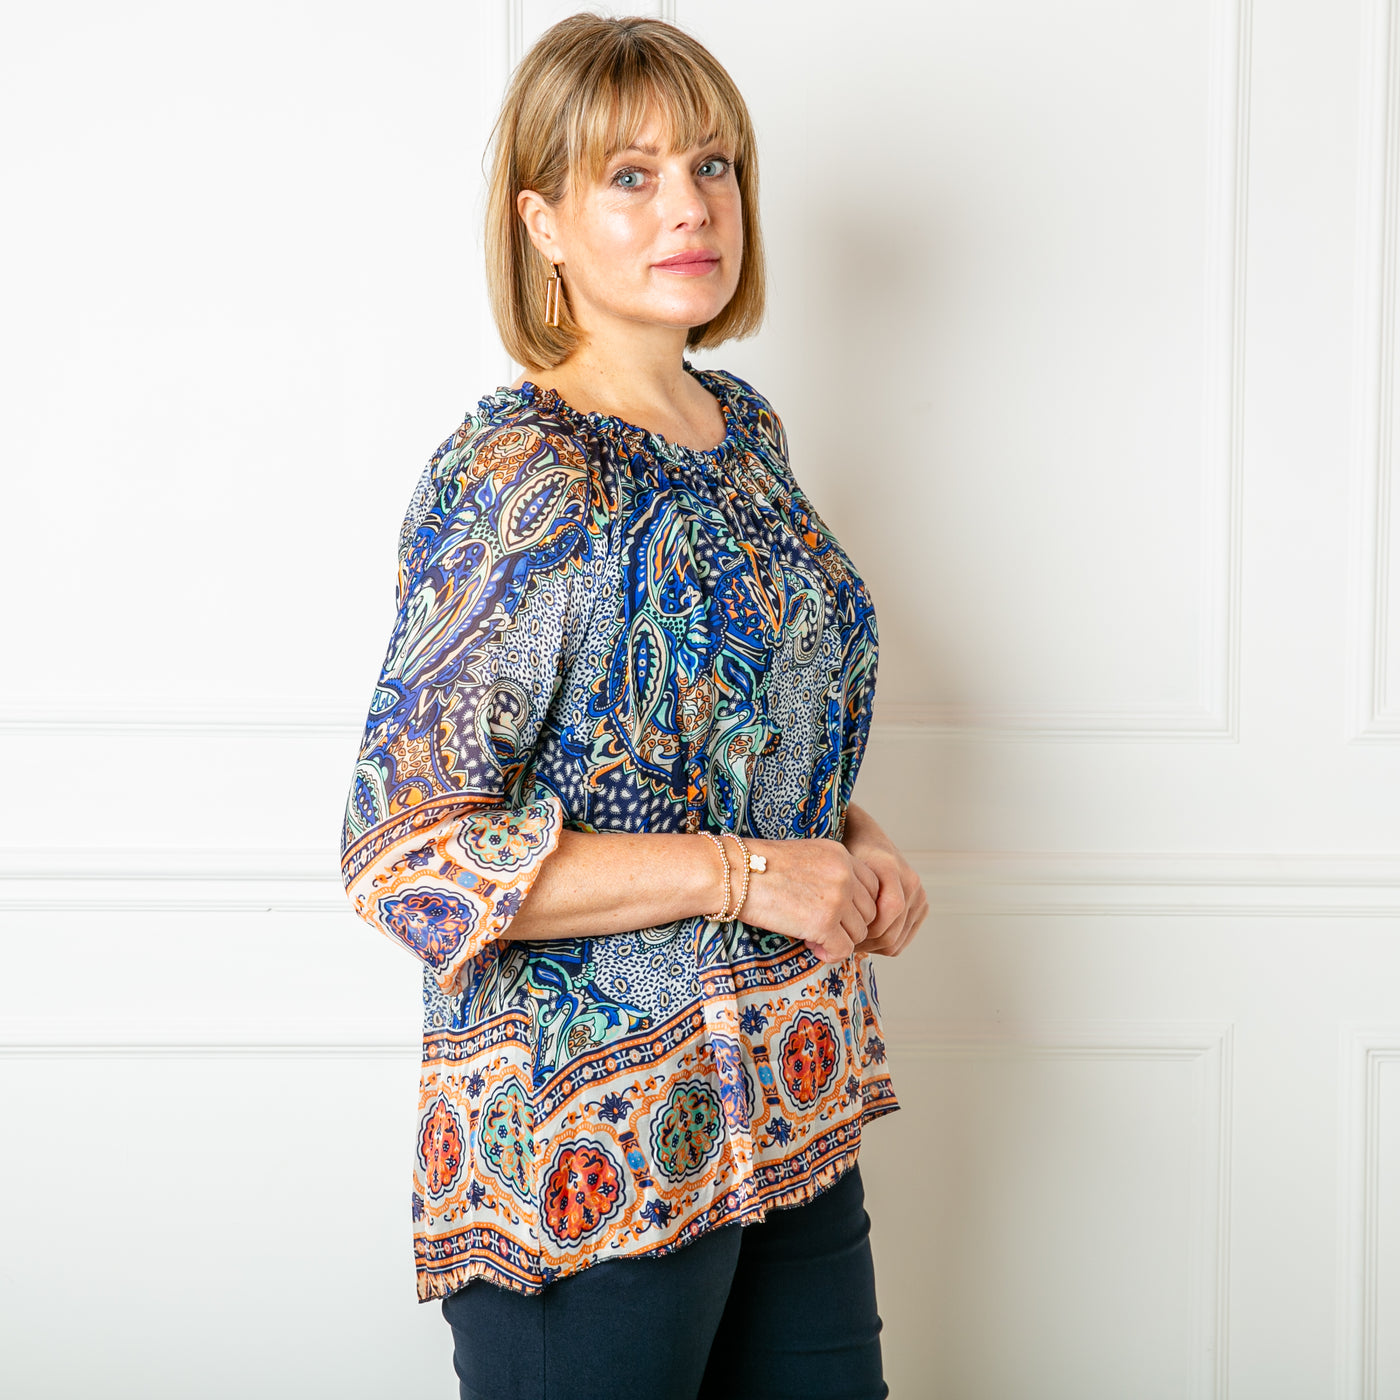 The navy blue Silk Blend Paisley Top in a beautiful, intrciate paisley print with a stretchy lining underneath